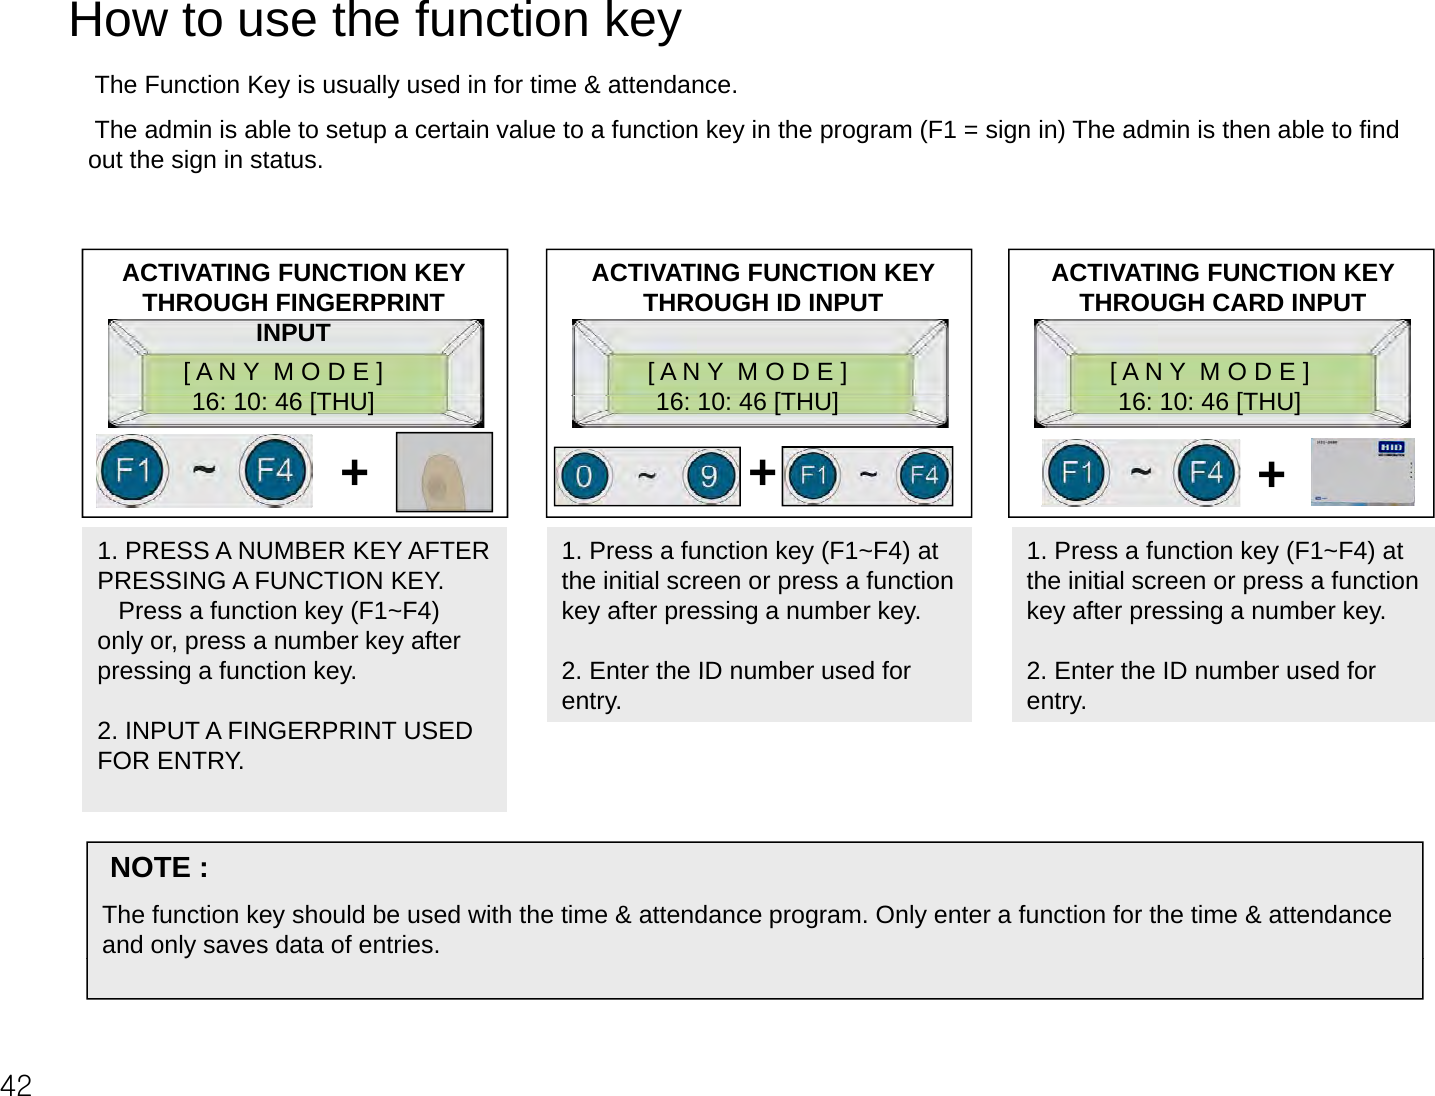 How to use the function keyThe Function Key is usually used in for time &amp; attendance.The admin is able to setup a certain value to a function key in the program (F1 = sign in) The admin is then able to find out the sign in status.[ A N Y  M O D E ]16 10 46 [THU]ACTIVATING FUNCTION KEY THROUGH FINGERPRINT INPUT[ A N Y  M O D E ] 16 10 46 [THU][ A N Y  M O D E ]16 10 46 [THU]ACTIVATING FUNCTION KEY THROUGH ID INPUT ACTIVATING FUNCTION KEY THROUGH CARD INPUT16: 10: 46 [THU]16: 10: 46 [THU]16: 10: 46 [THU]++ +1. Press a function key (F1~F4) at the initial screen or press a function key after pressing a number key. 2.Enter the ID number used for1. PRESS A NUMBER KEY AFTER PRESSING A FUNCTION KEY. Press a function key (F1~F4) only or, press a number key after pressing a function key.1. Press a function key (F1~F4) at the initial screen or press a function key after pressing a number key. 2. Enter the ID number used for2. Enter the ID number used for entry.pressing a function key.2. INPUT A FINGERPRINT USED FOR ENTRY.2. Enter the ID number used for entry.NOTE :The function key should be used with the time &amp; attendance program. Only enter a function for the time &amp; attendance and only saves data of entries.42y